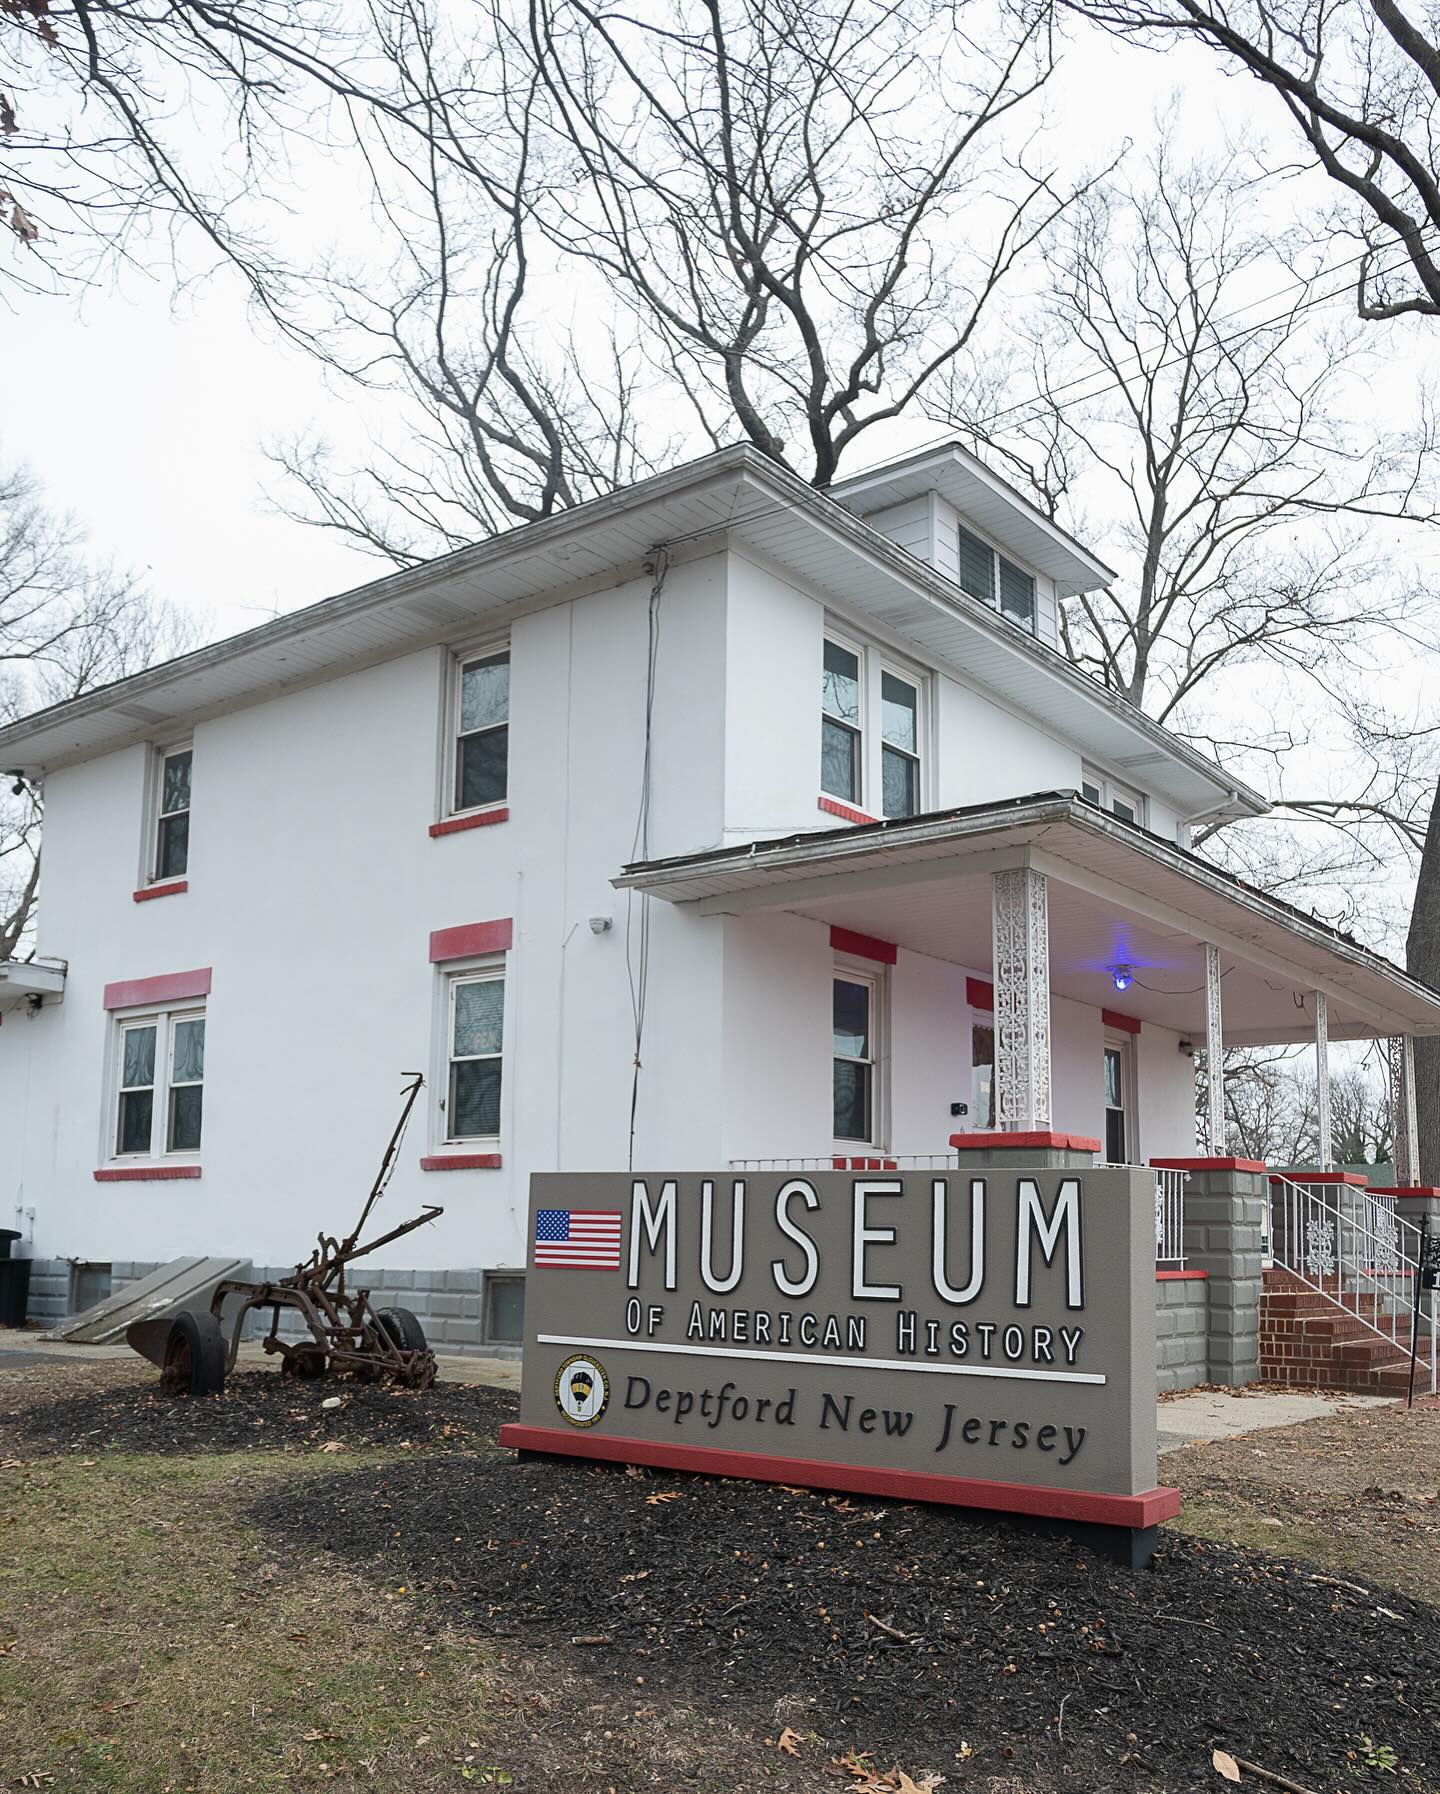 Museum of American History, Deptford NJ - Your complete guide to